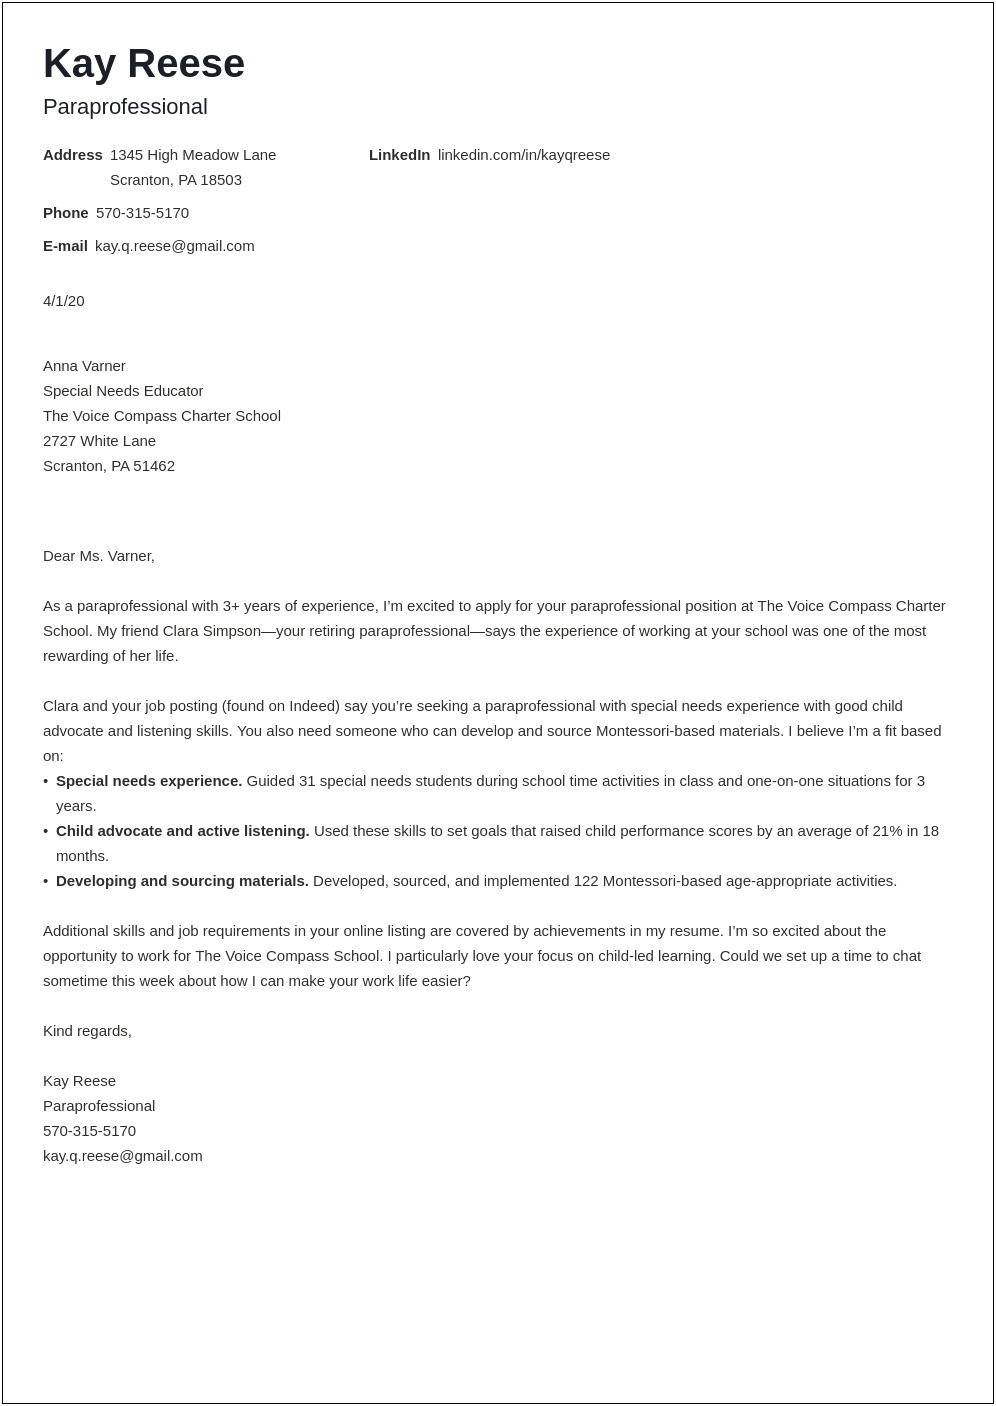 Paraprofessional Resume Cover Letter Examples